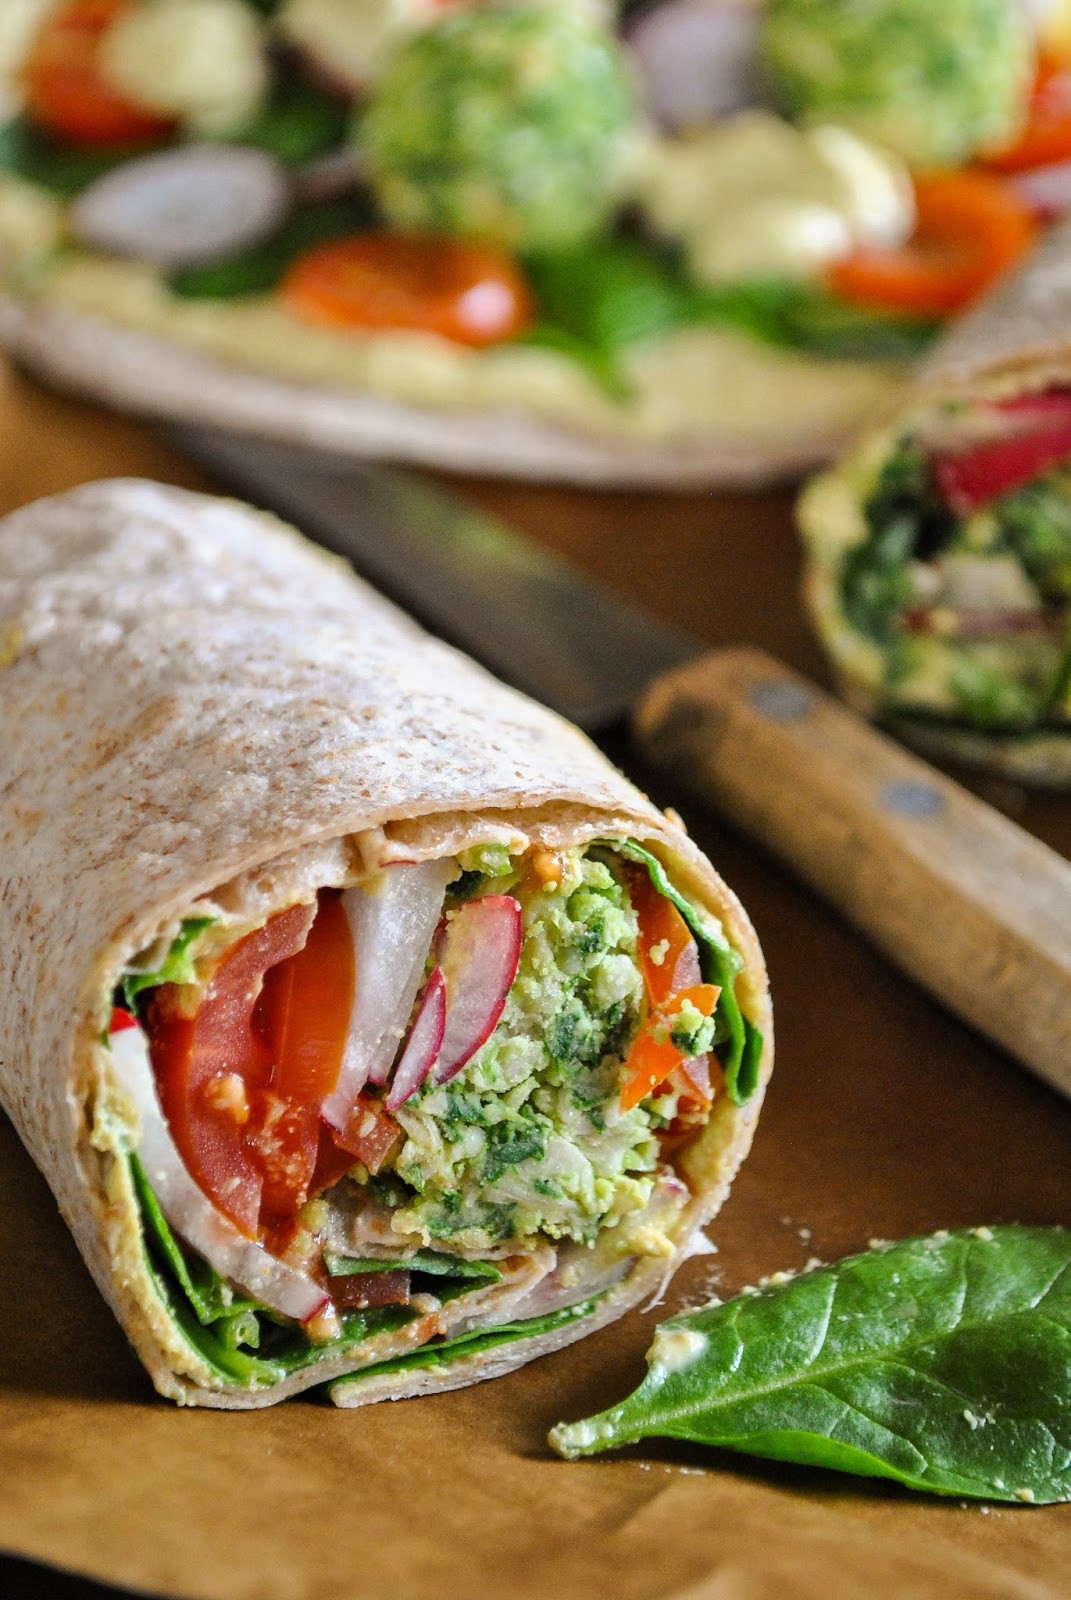 Vegan Wrap Recipes
 Vegan wraps with baked spinach balls and lemony dressing